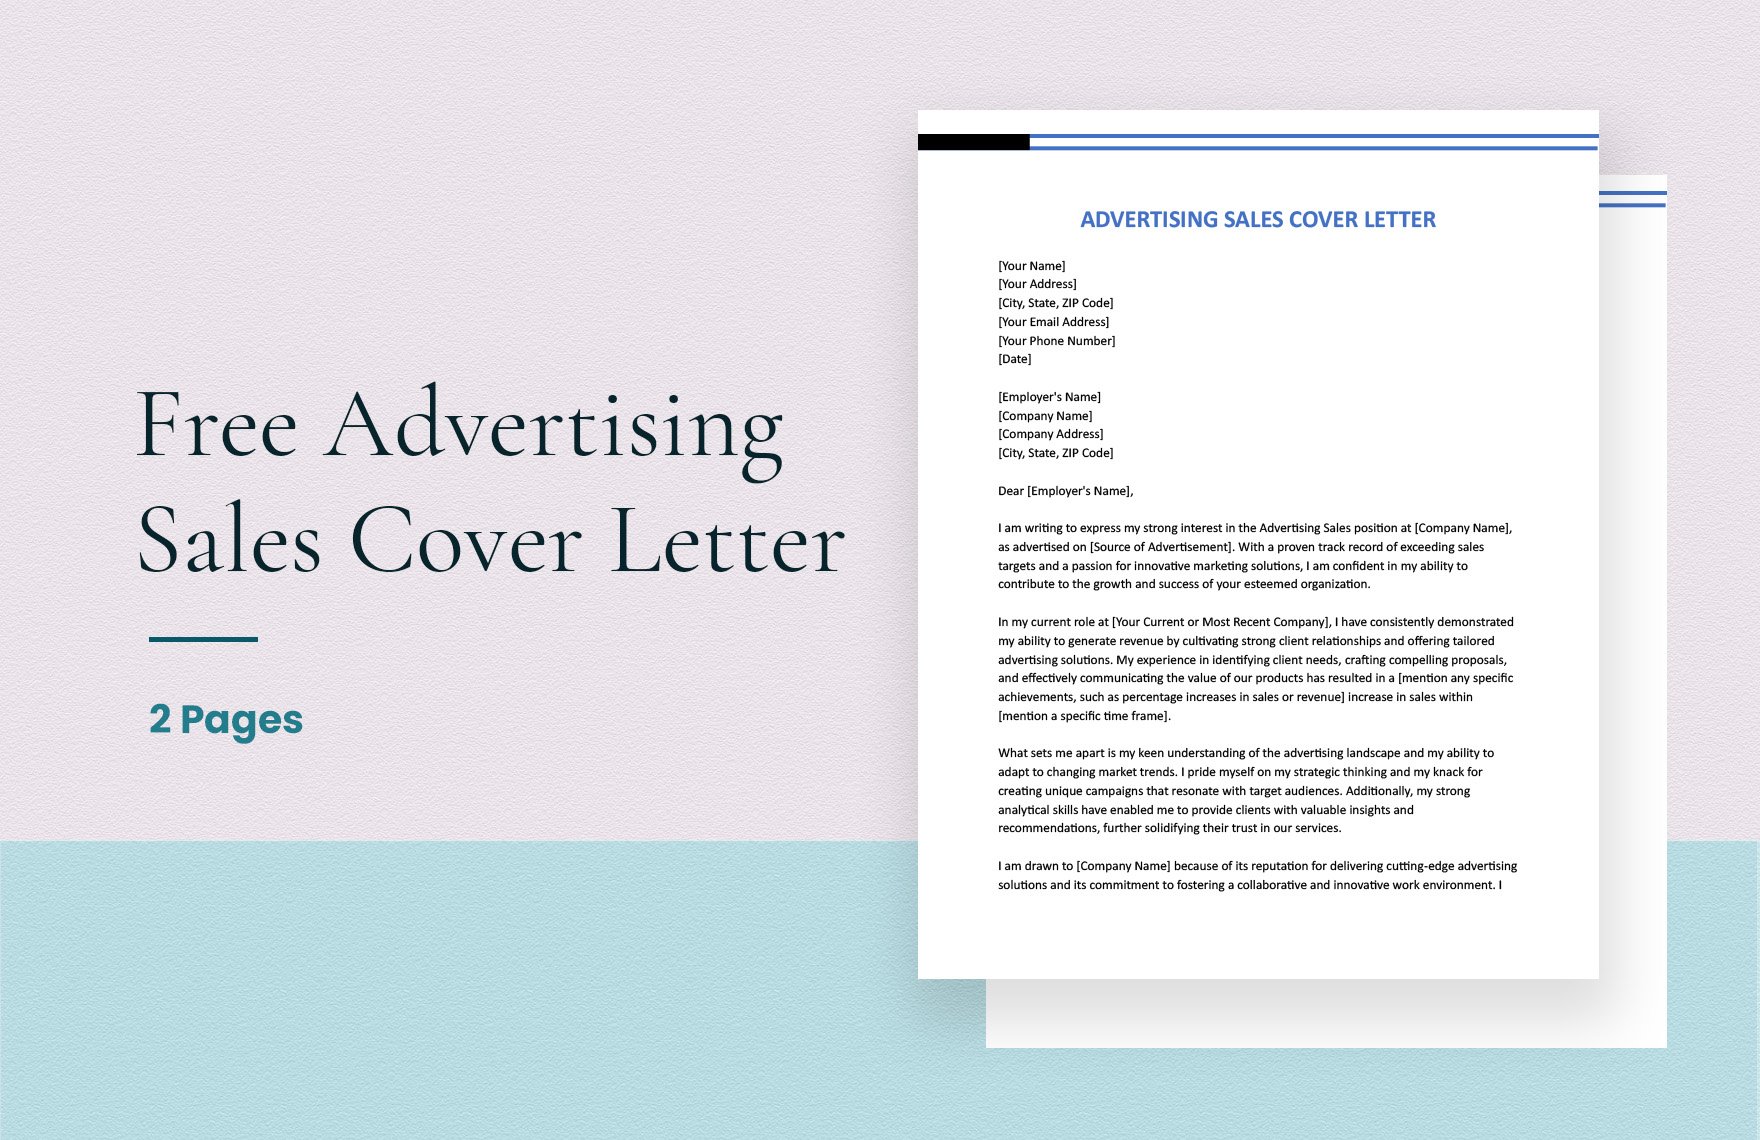 Advertising Sales Cover Letter